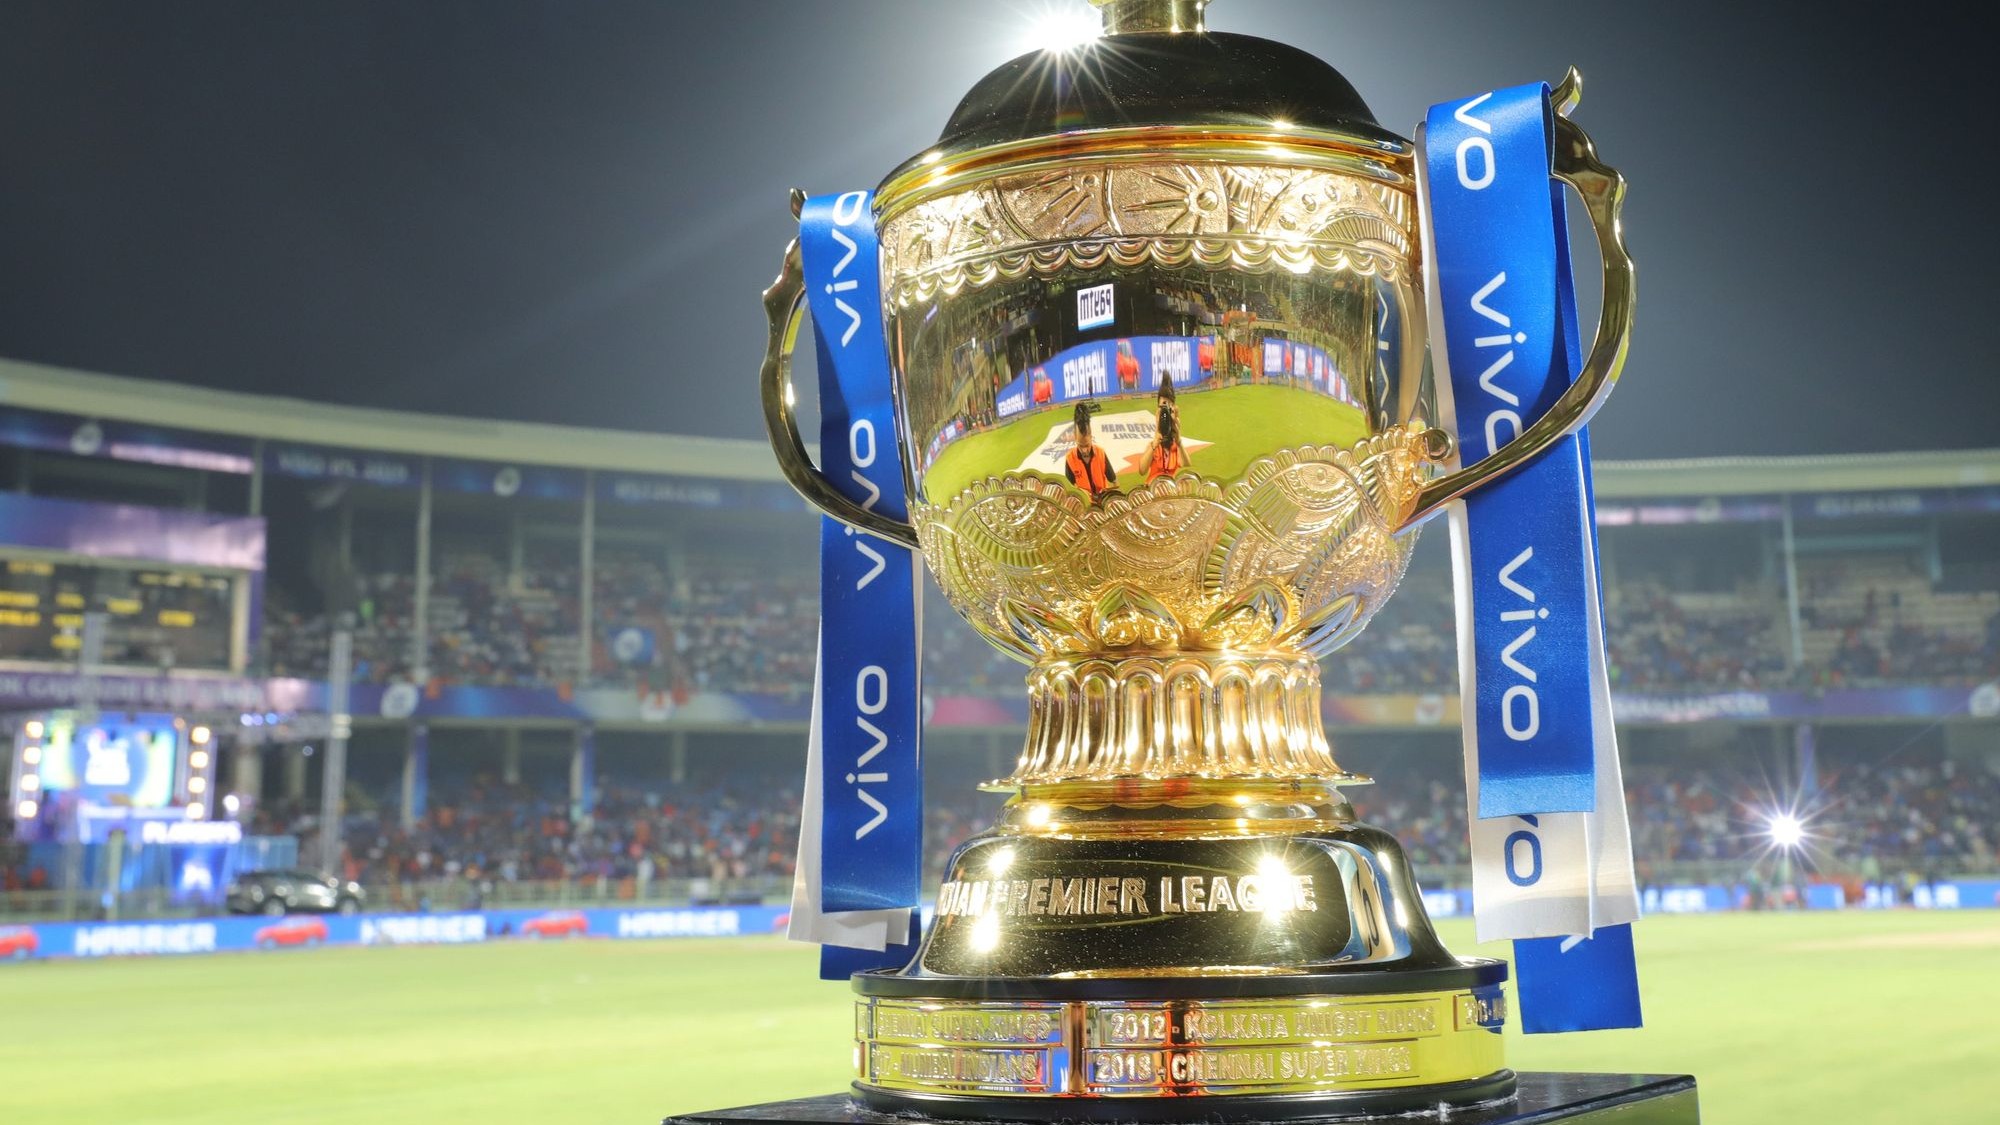 IPL 2020: IPL 13 final may be postponed by a few days, says report